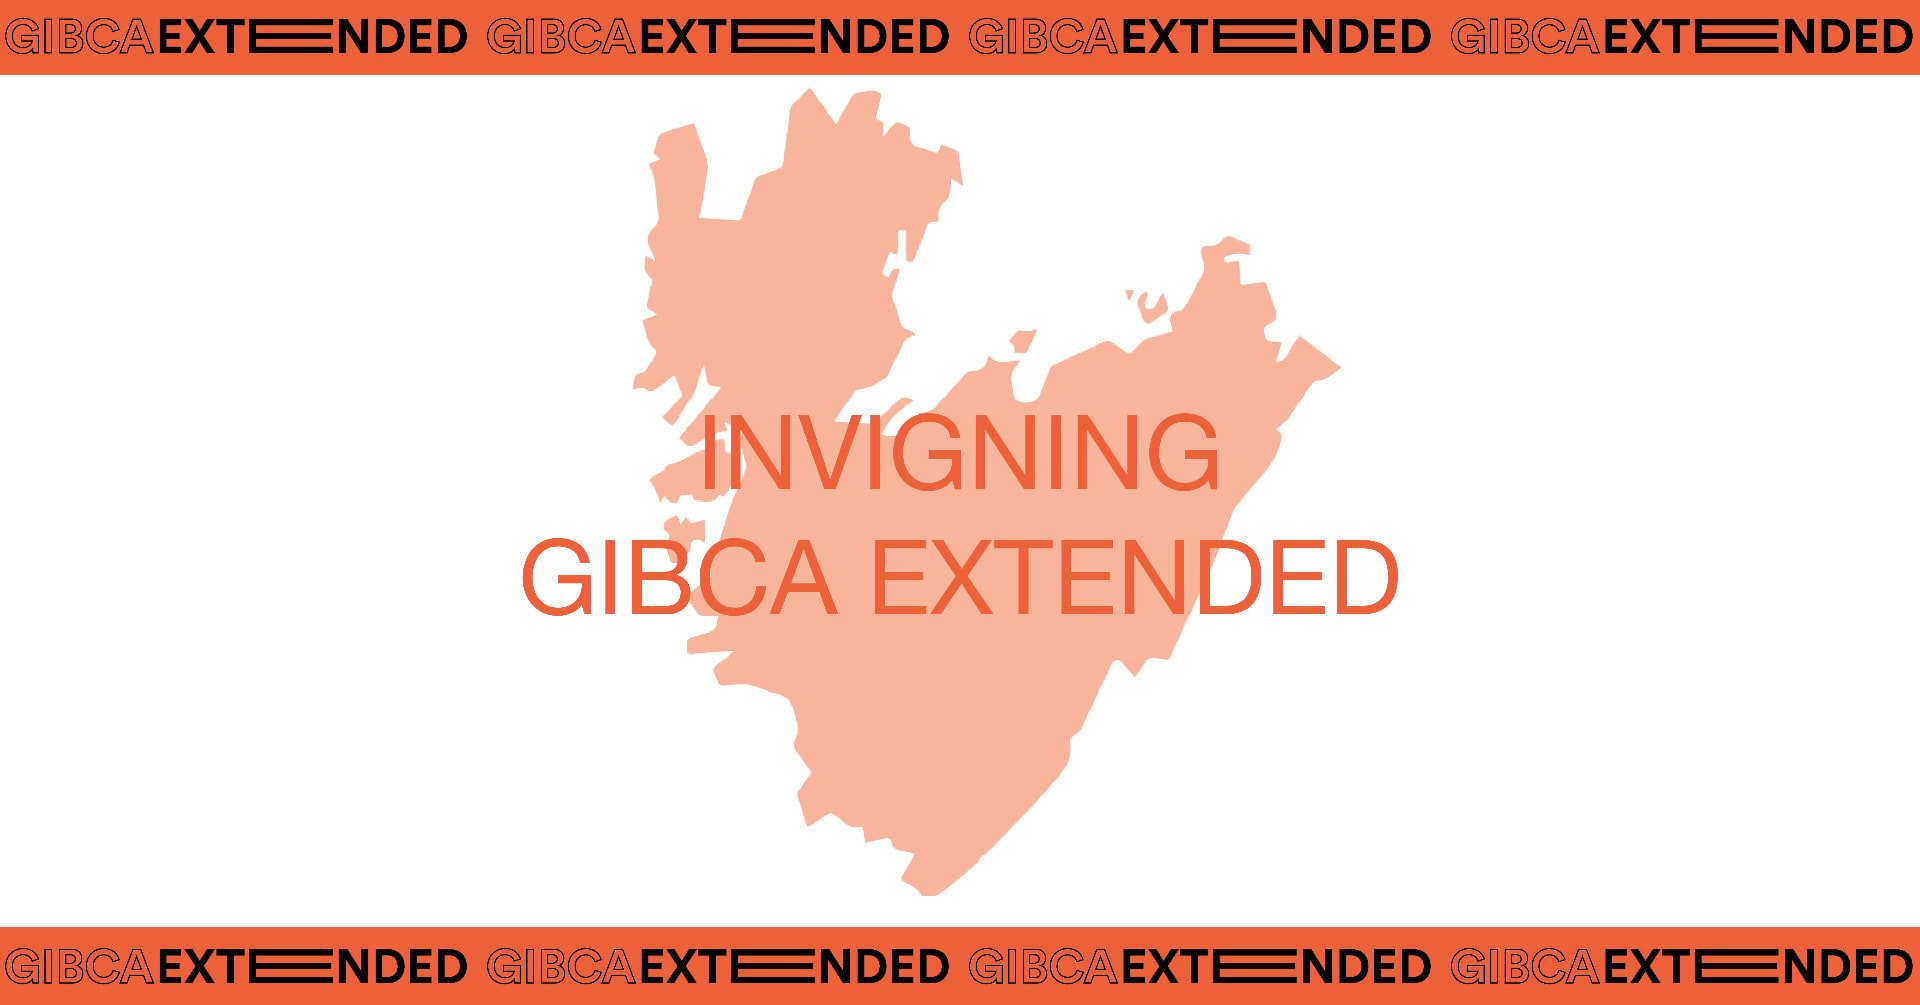 Invigning GIBCA Extended